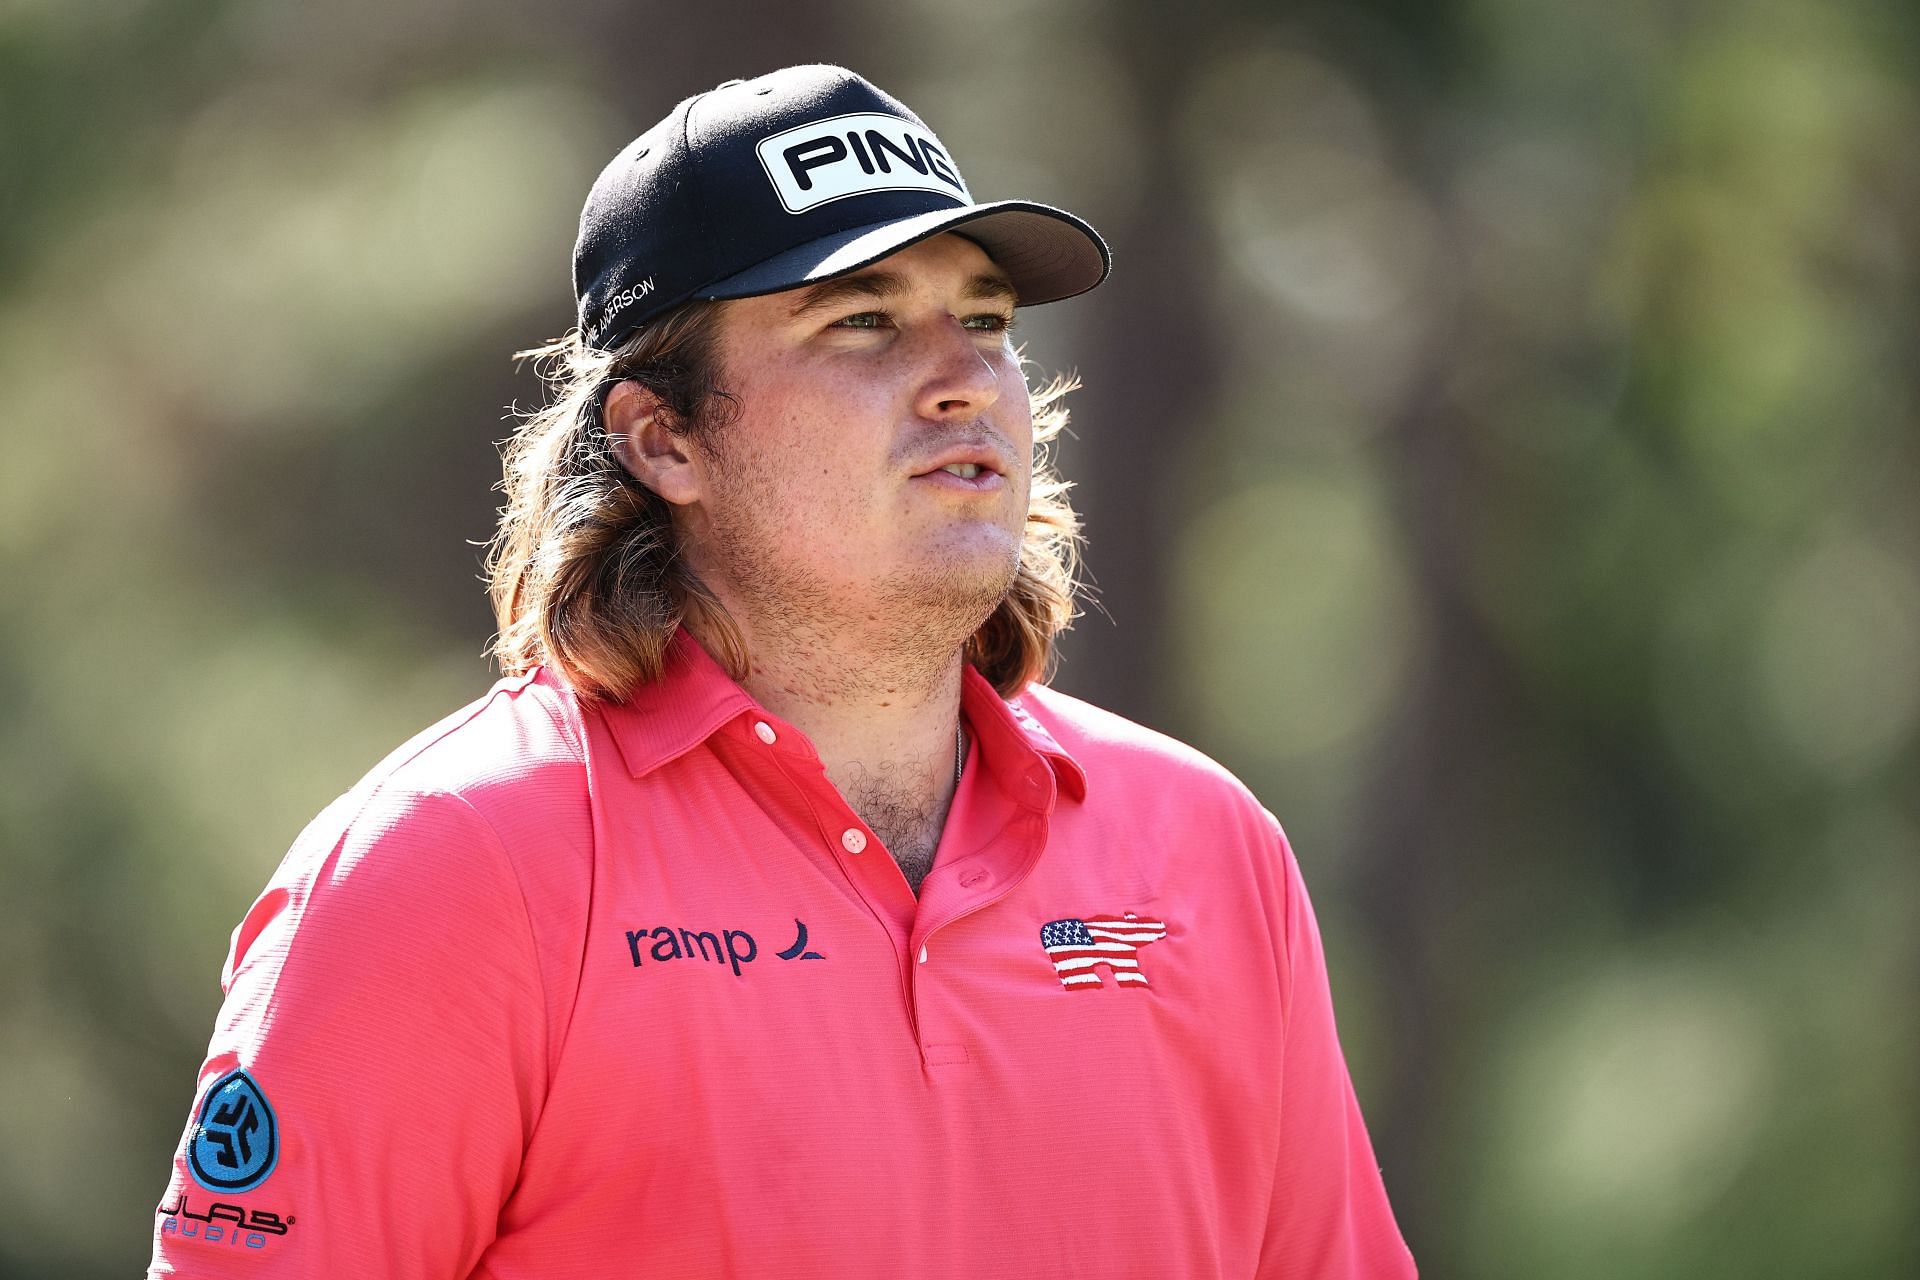 Neal Shipley is going to make his PGA Tour debut this weekend